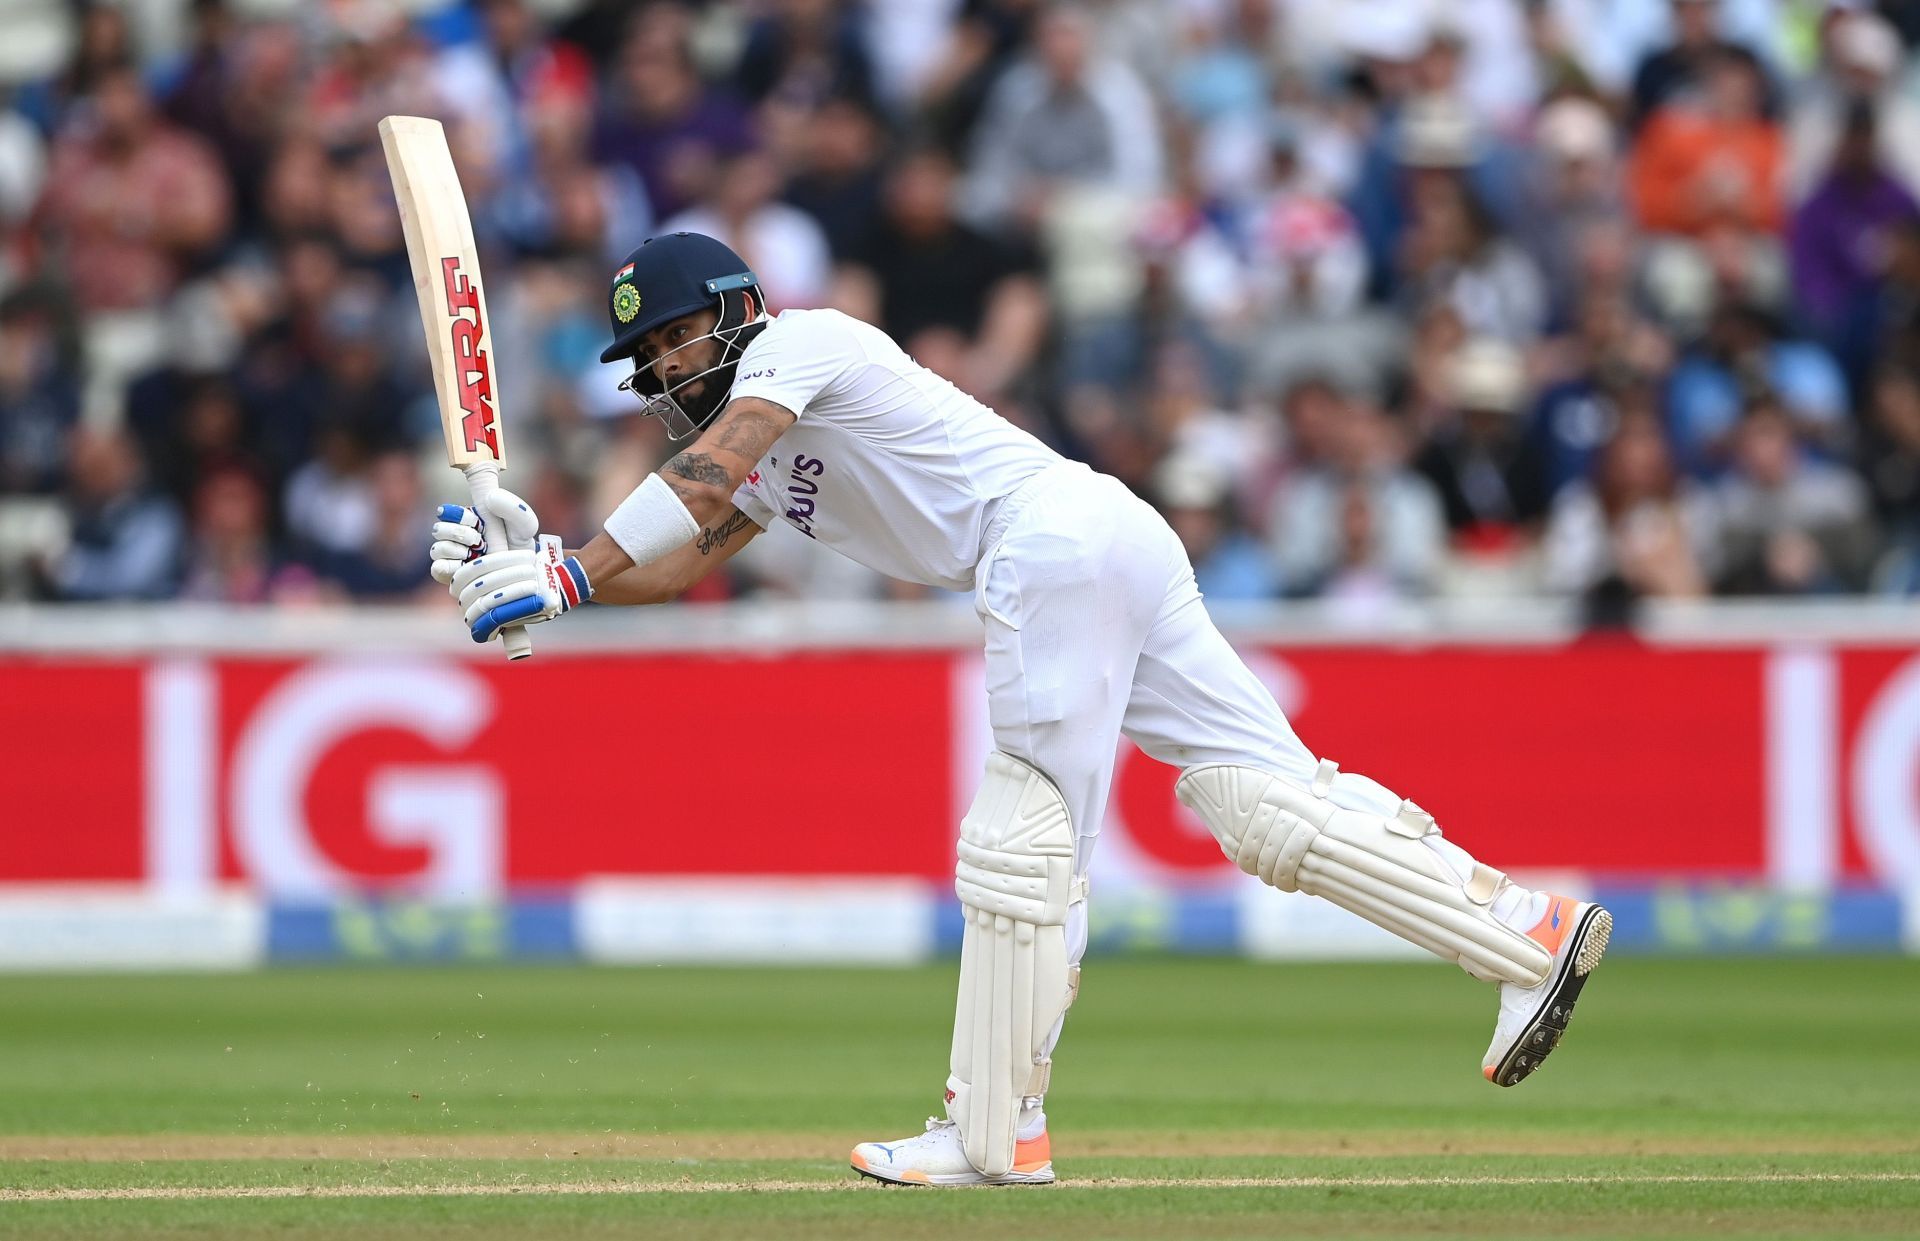 Virat Kohli has two Test hundreds in England. Pic: Getty Images